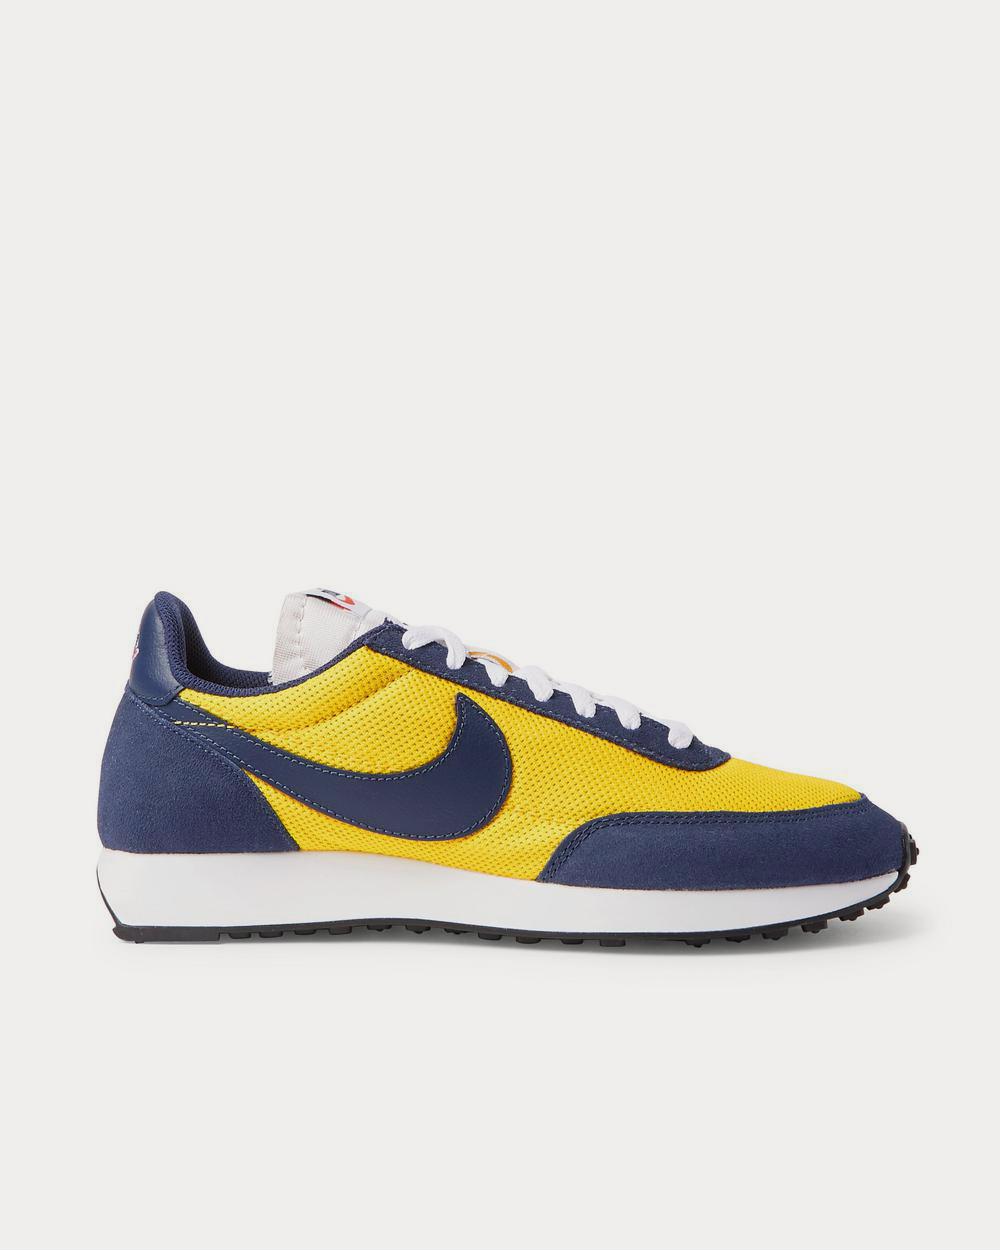 Nike Air Tailwind 79 Mesh, Suede and Yellow low top sneakers - Sneak in Peace